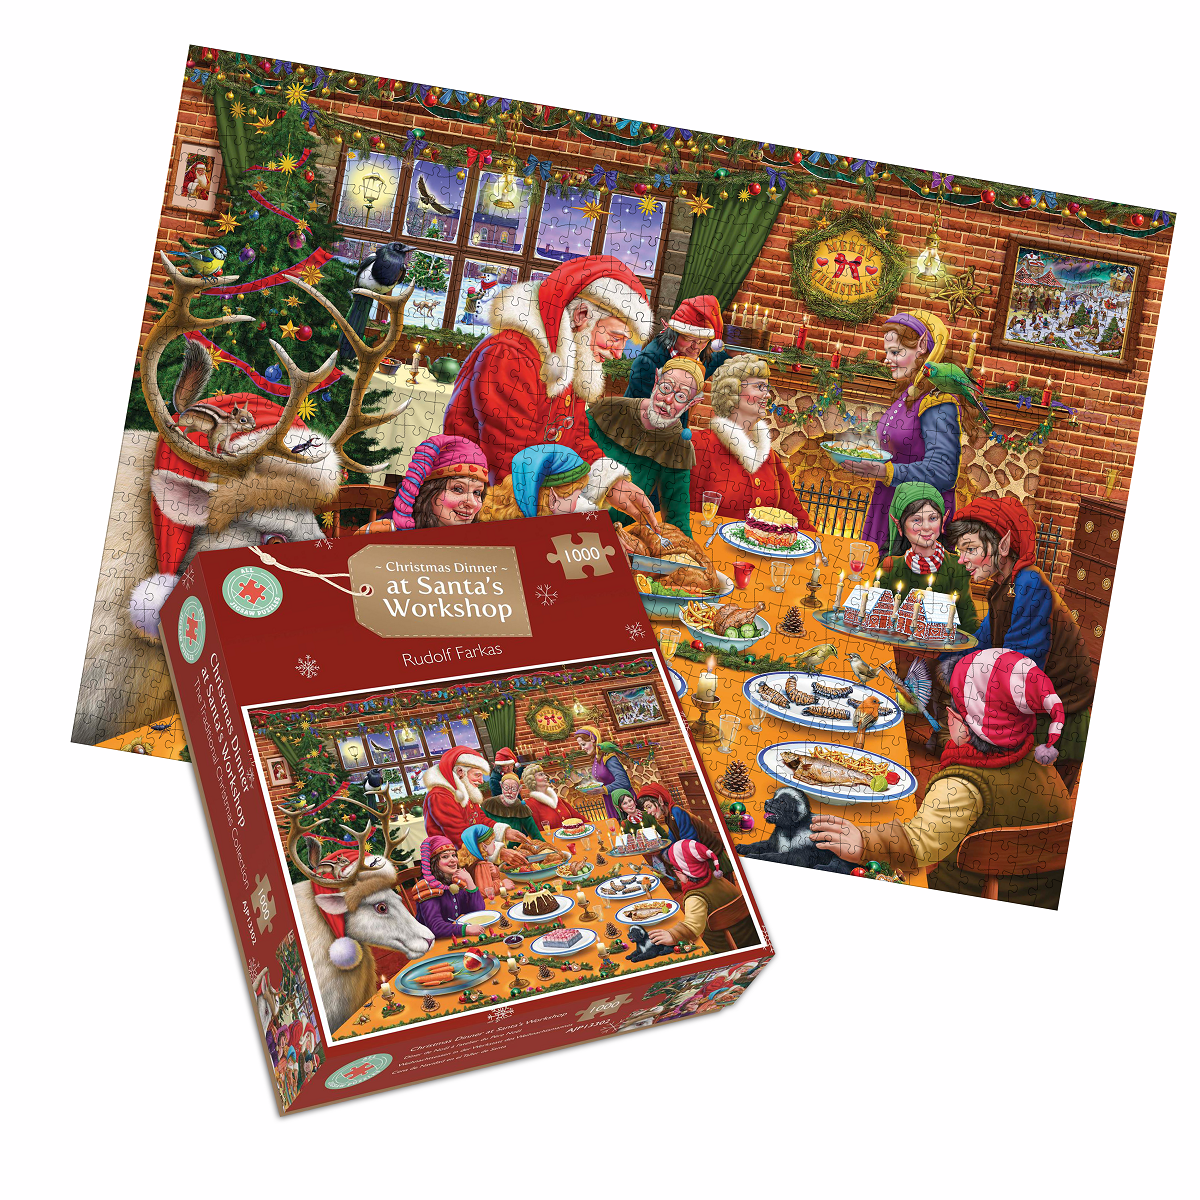 The Christmas Train 1000 Piece Jigsaw Puzzle  All Jigsaw Puzzles UK – All  Jigsaw Puzzles US